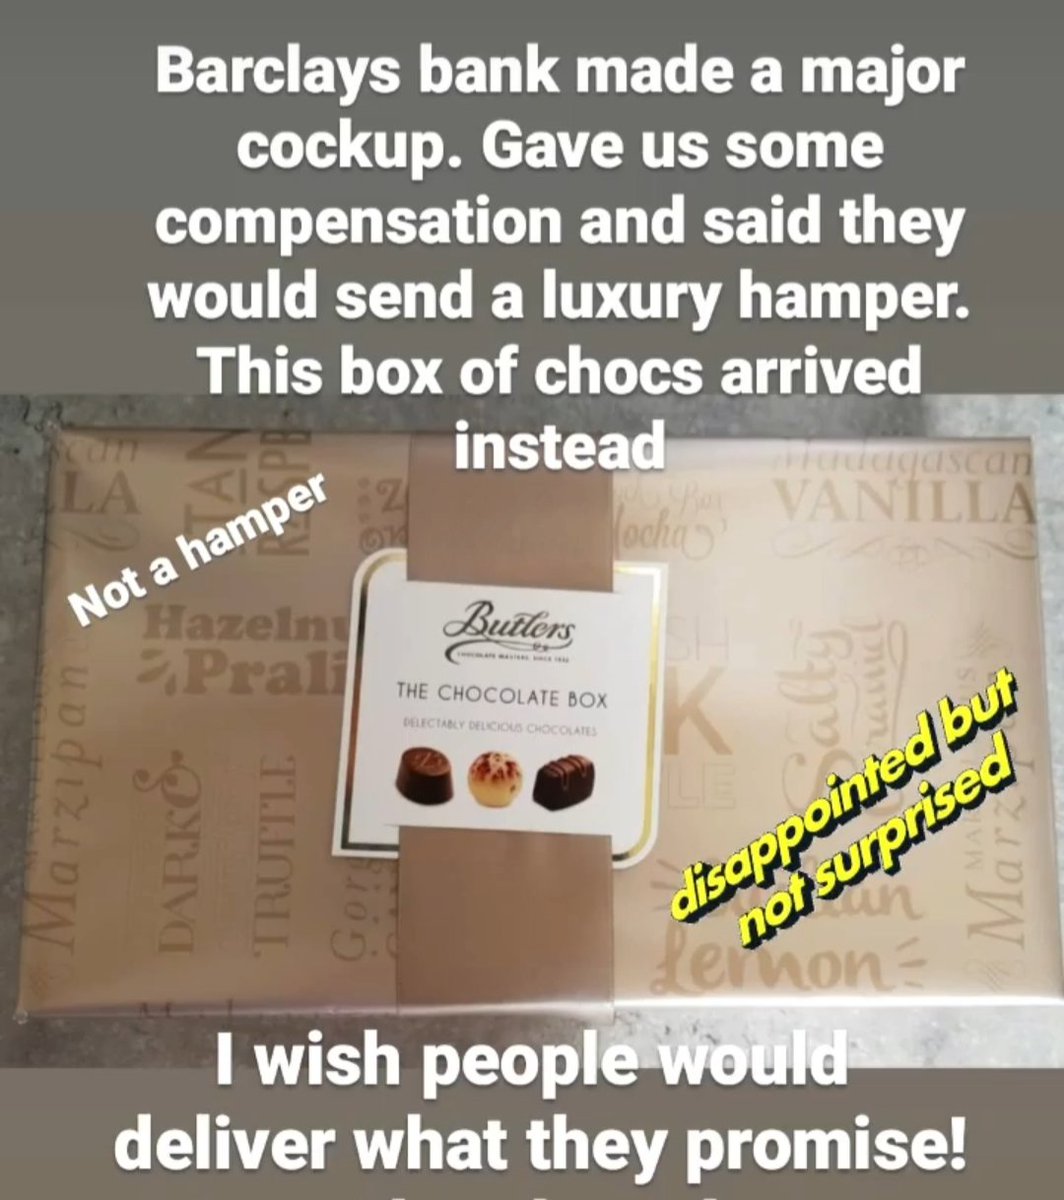 Barclays phoned and refuse to see why we have a problem with this. 
They sent a cheap box of chocs after promising to send a luxury hamper. There is a big difference and it feels like a fob off. They just can't get anything right. This is such a wind up! 😡 @Barclays #bankfail